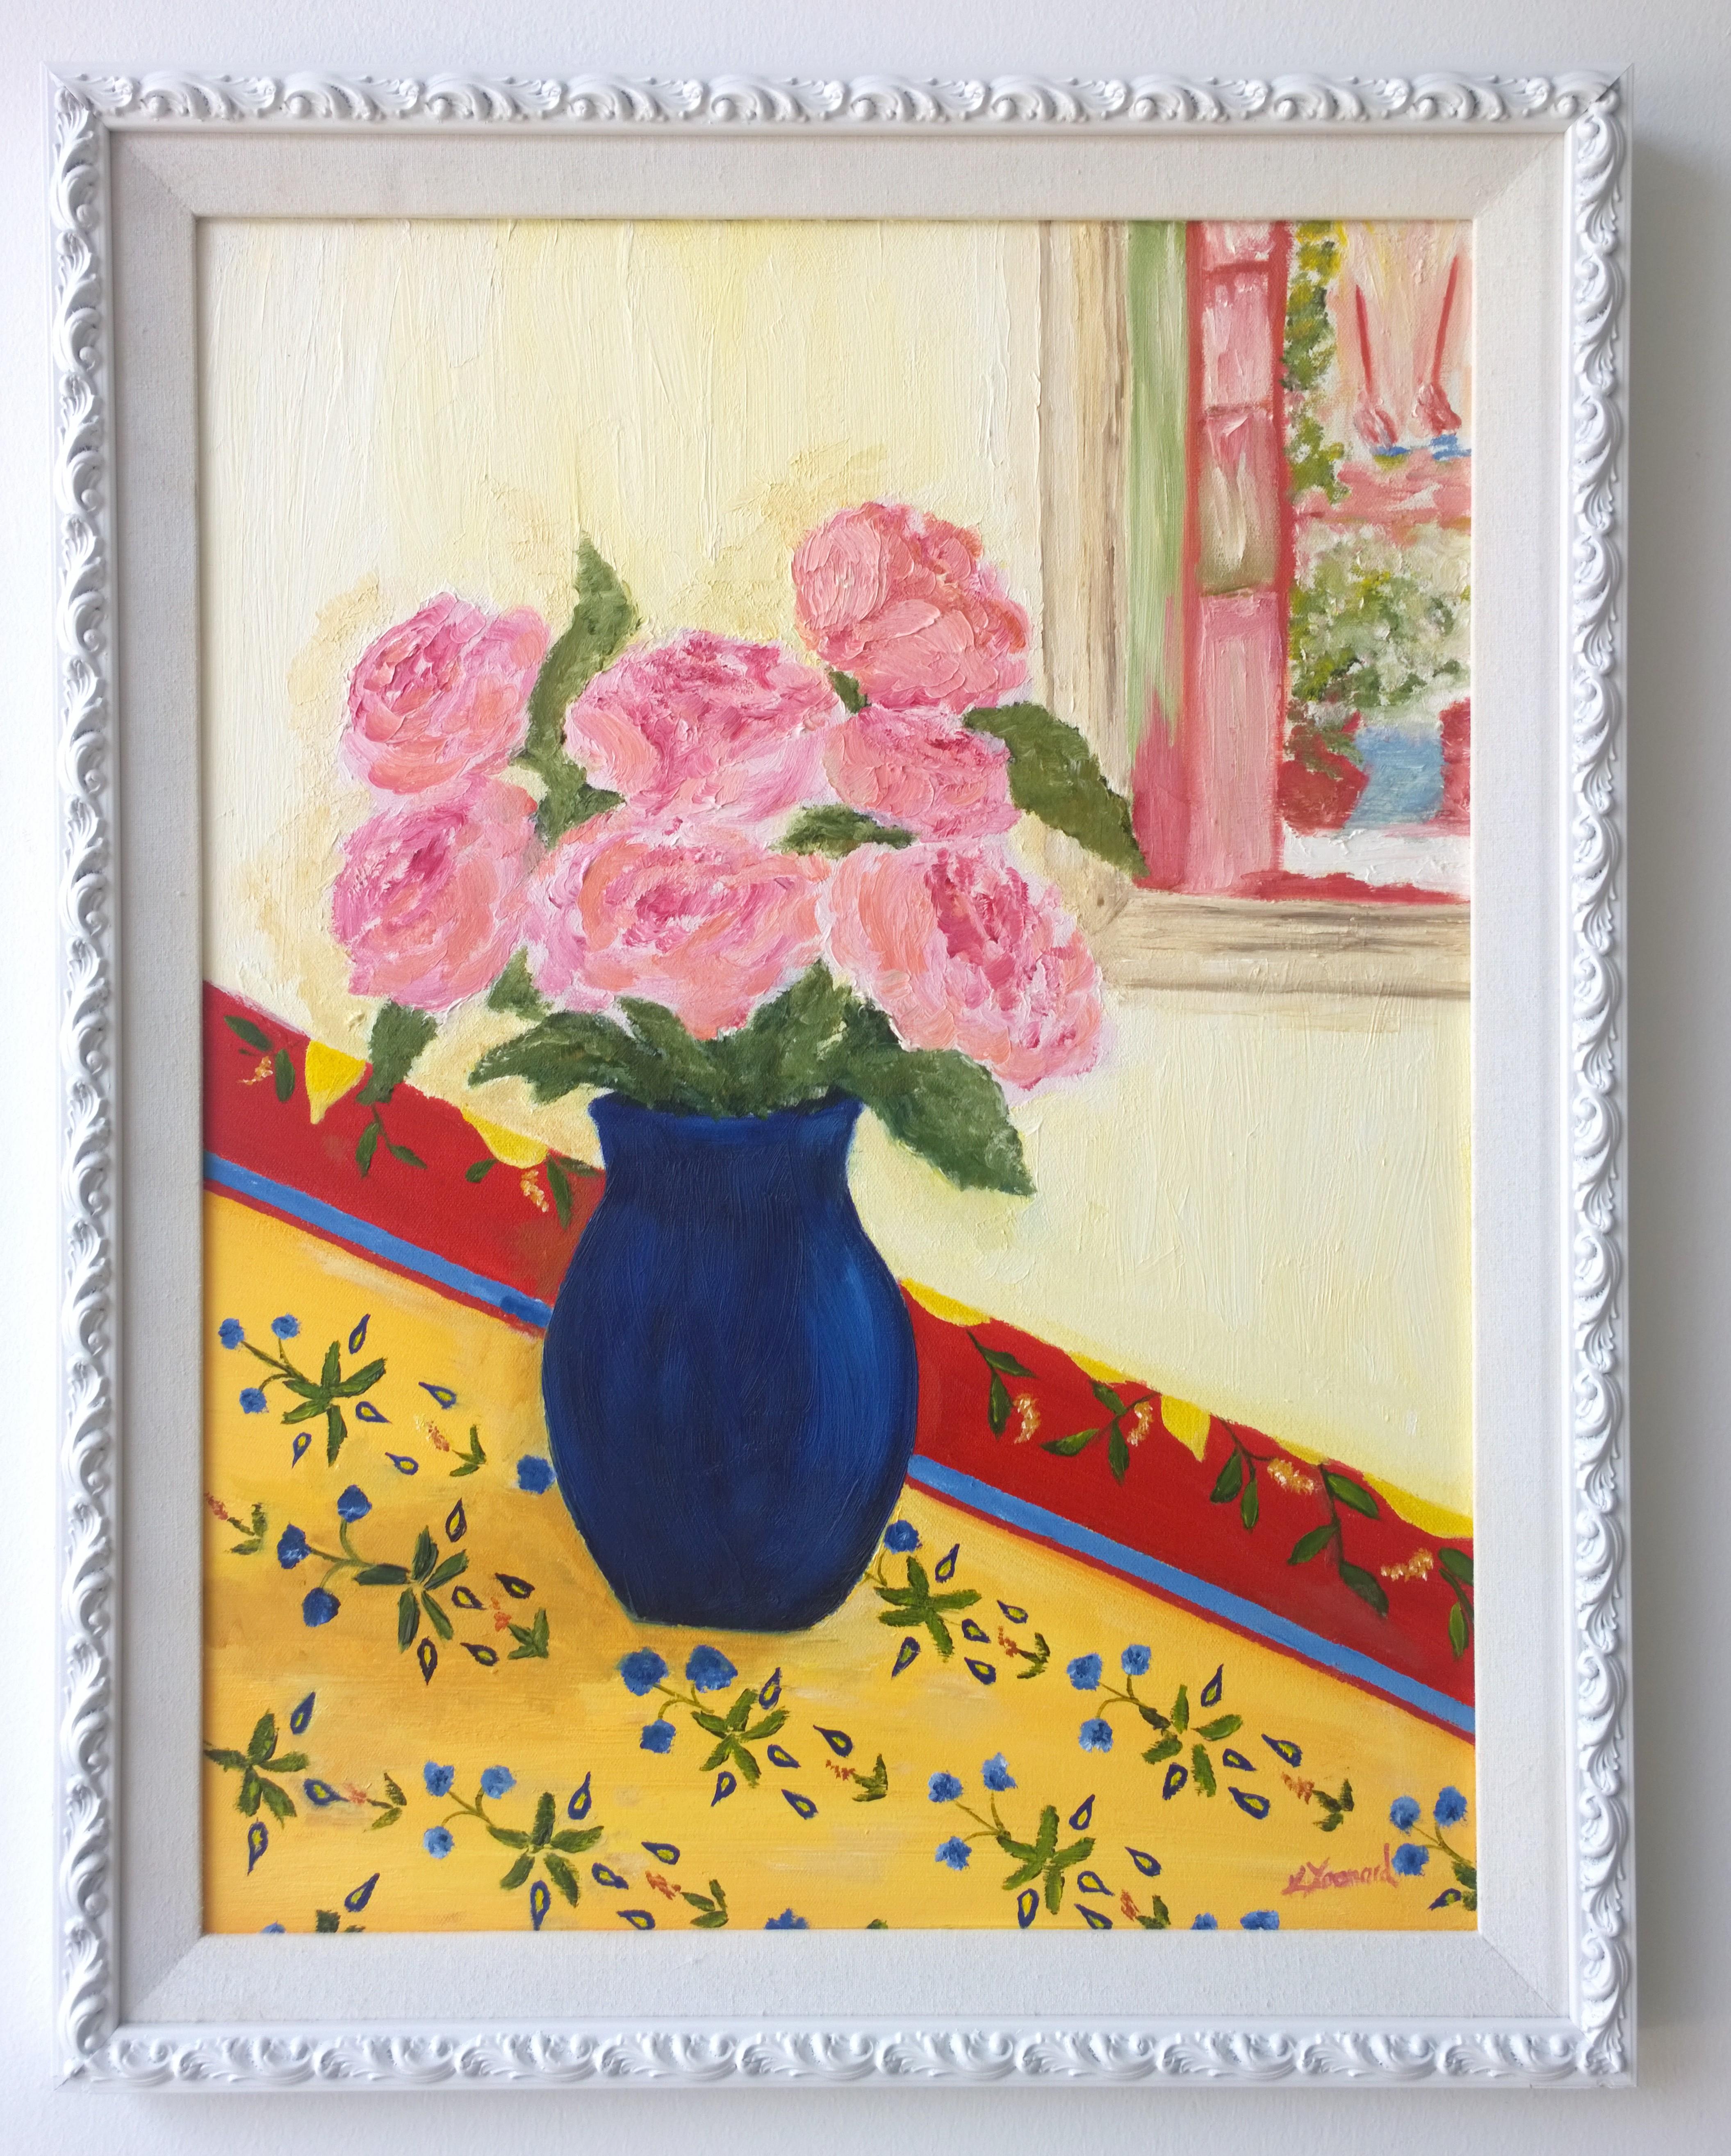 Offered is a 20th century oil painting still life of flowers in a vase signed by Kelly Yoonard in the 